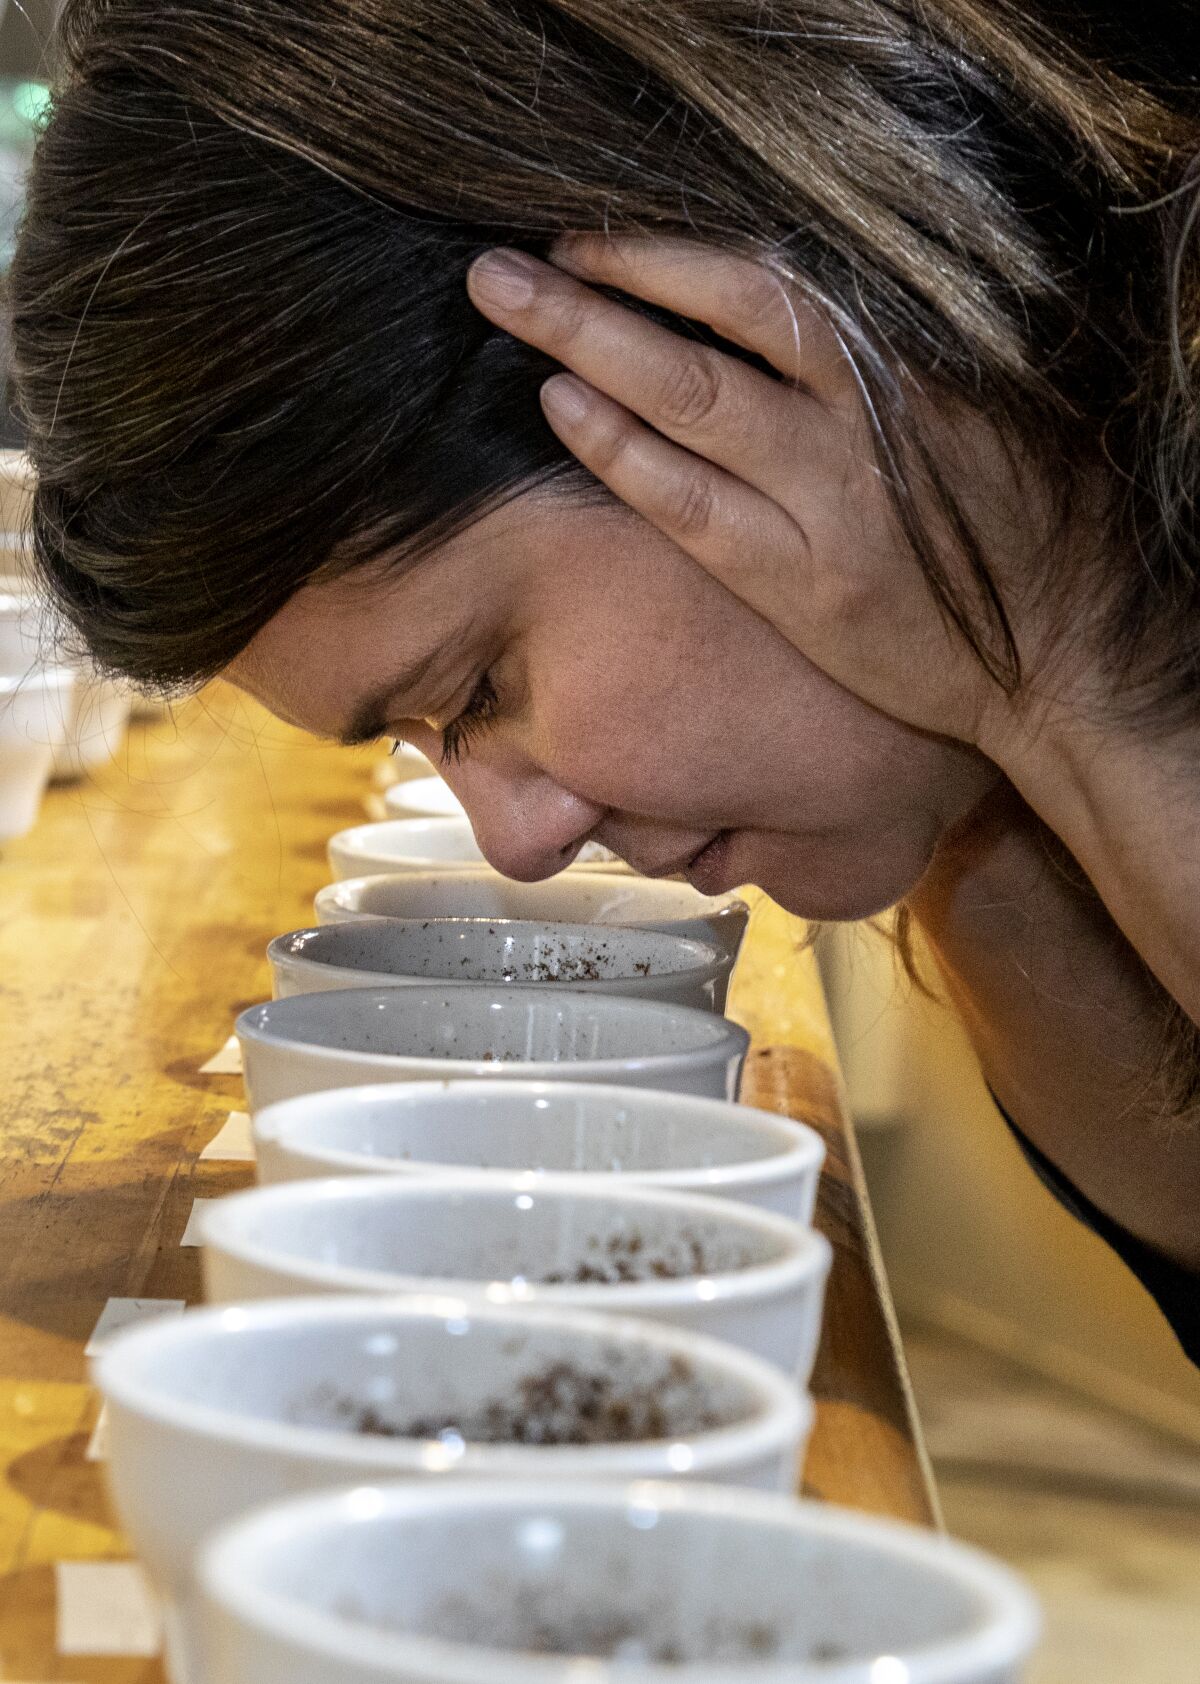 Trish Rothgeb smells the different coffee grounds set out during a tasting session at Wrecking Ball Coffee Roasters